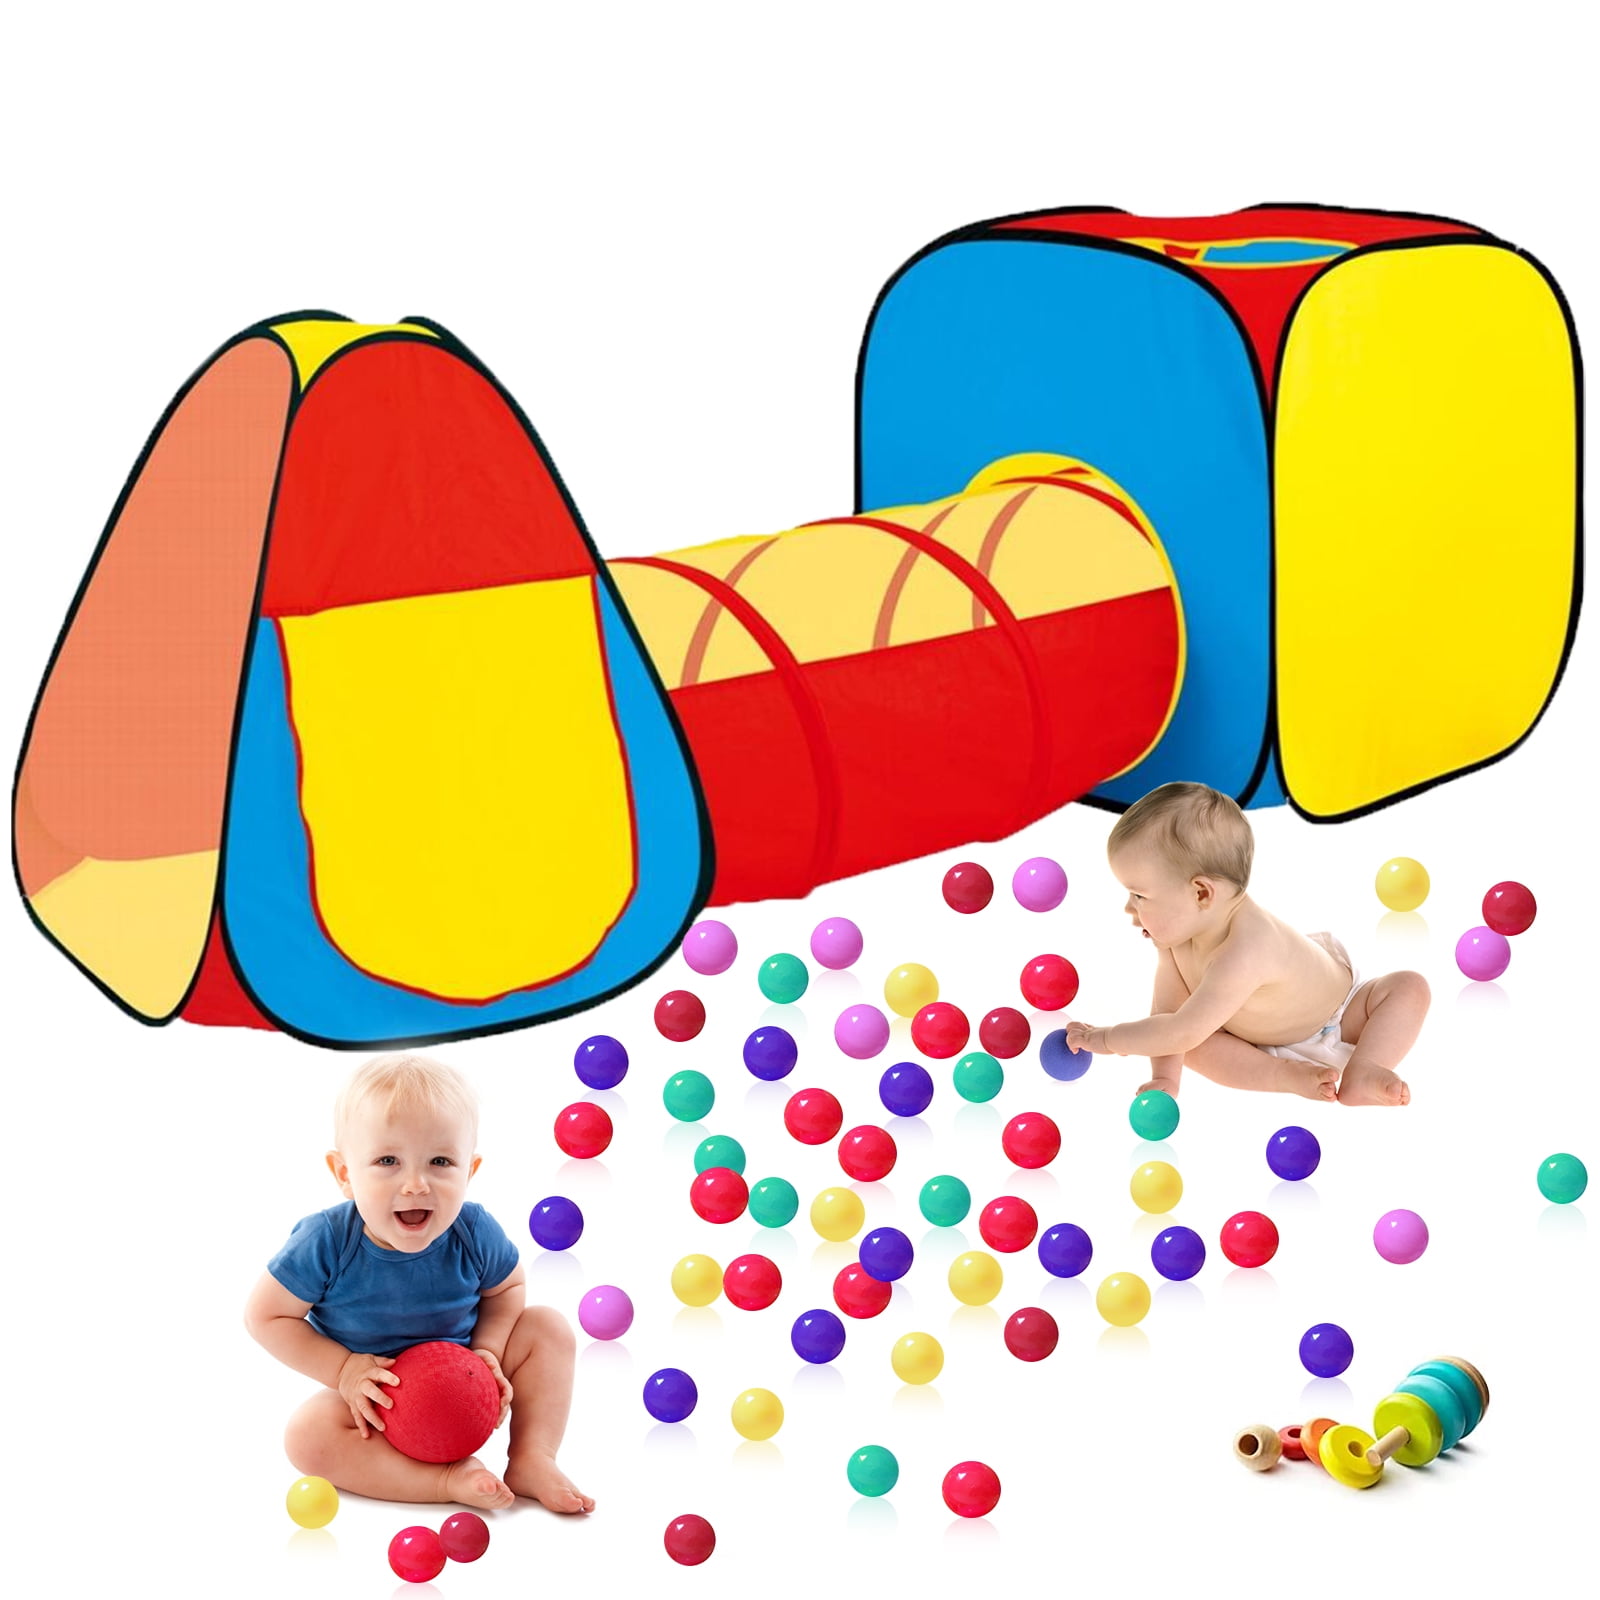 Details about   3 in 1 Kids Play Tent Toddler Balls Pit Pop Up Cubby Playhouse Tunnel Play Set 